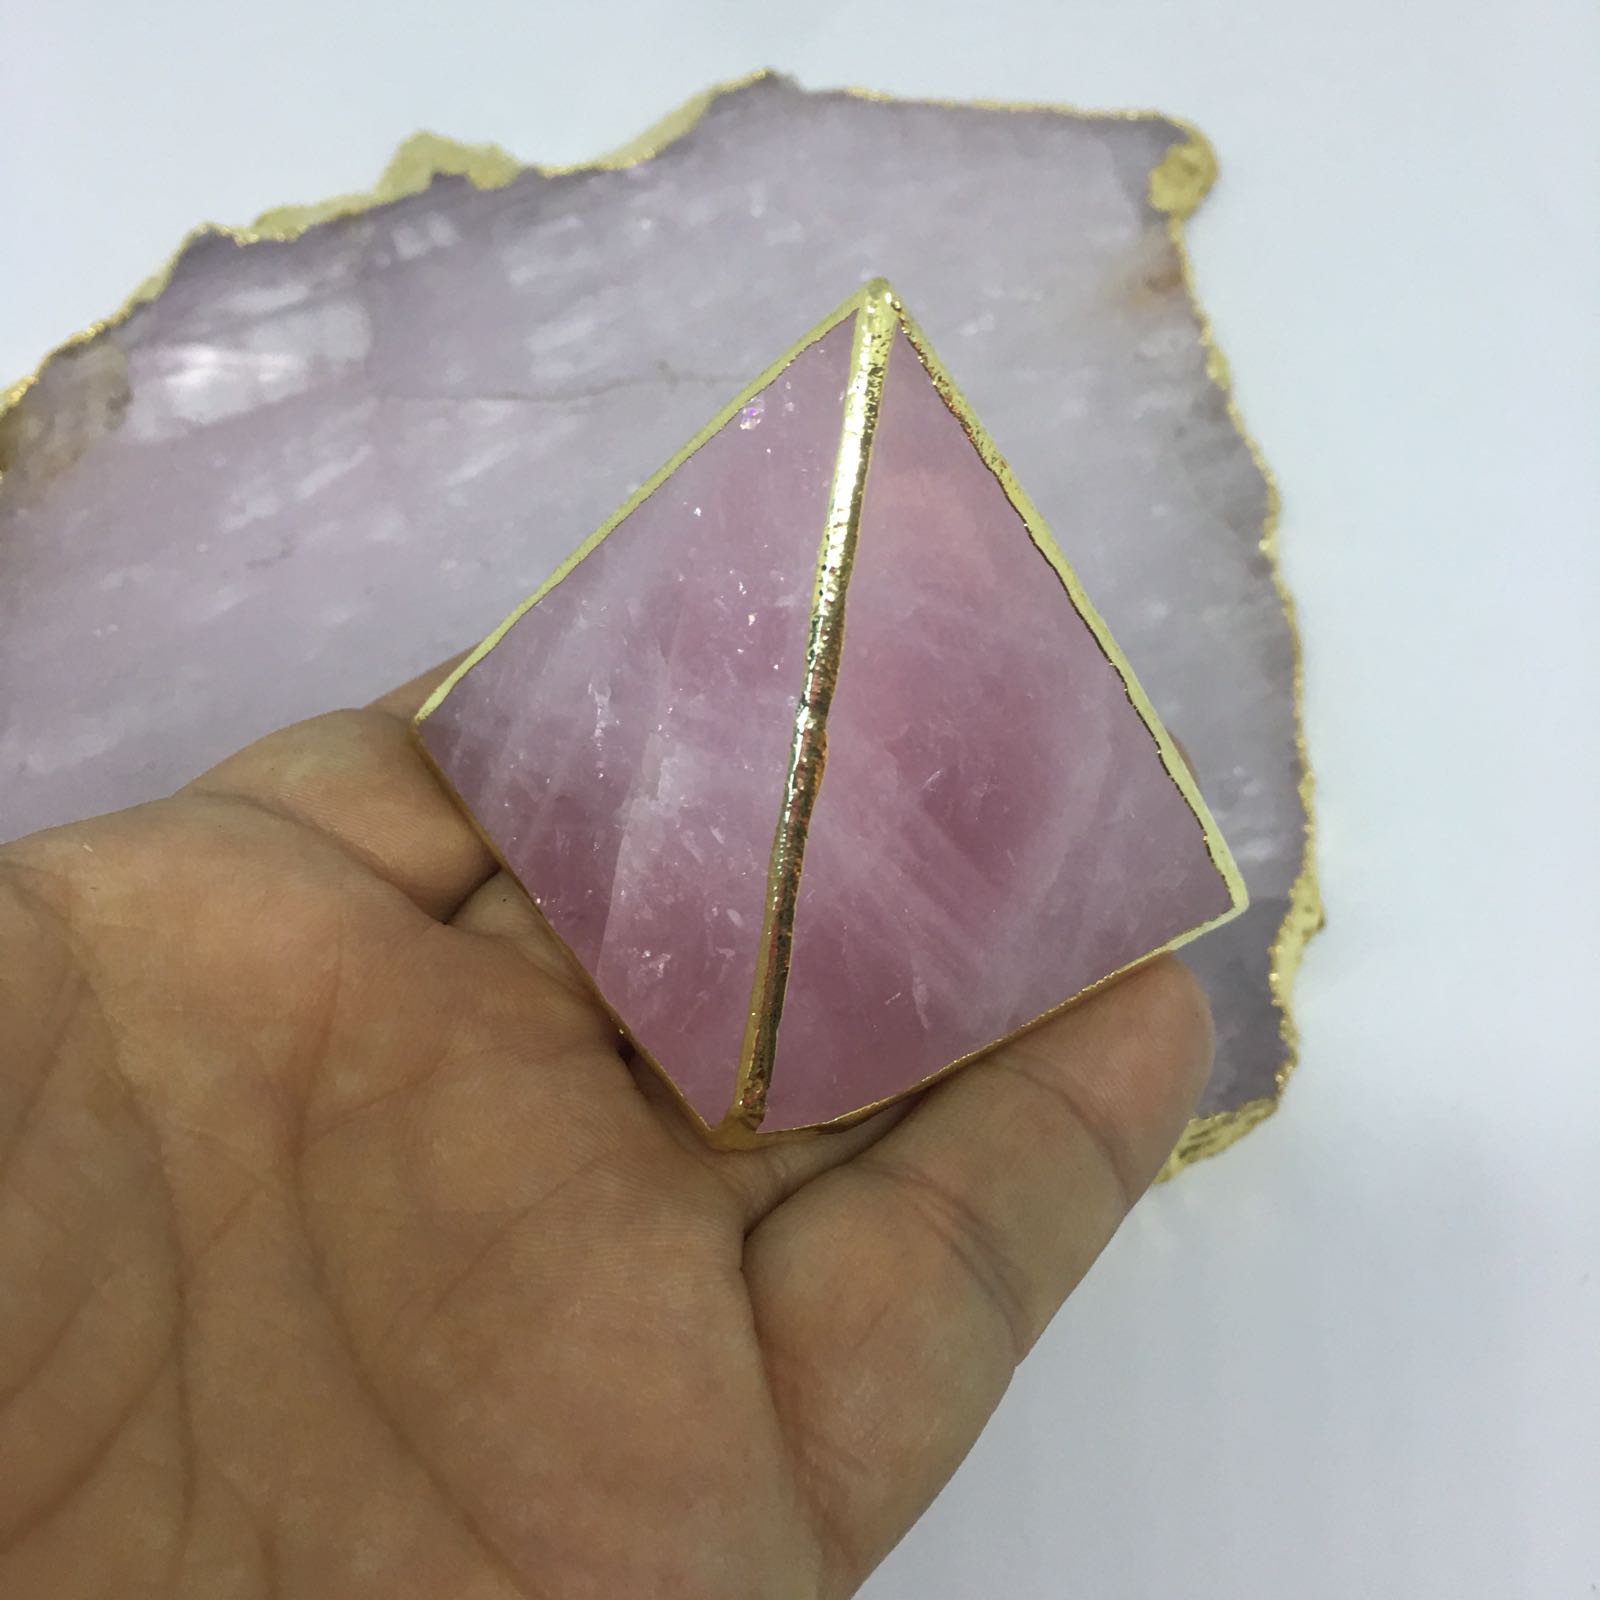 Stones from Uruguay - Gold Plated Rose Quartz Pyramid for Decoration & Home